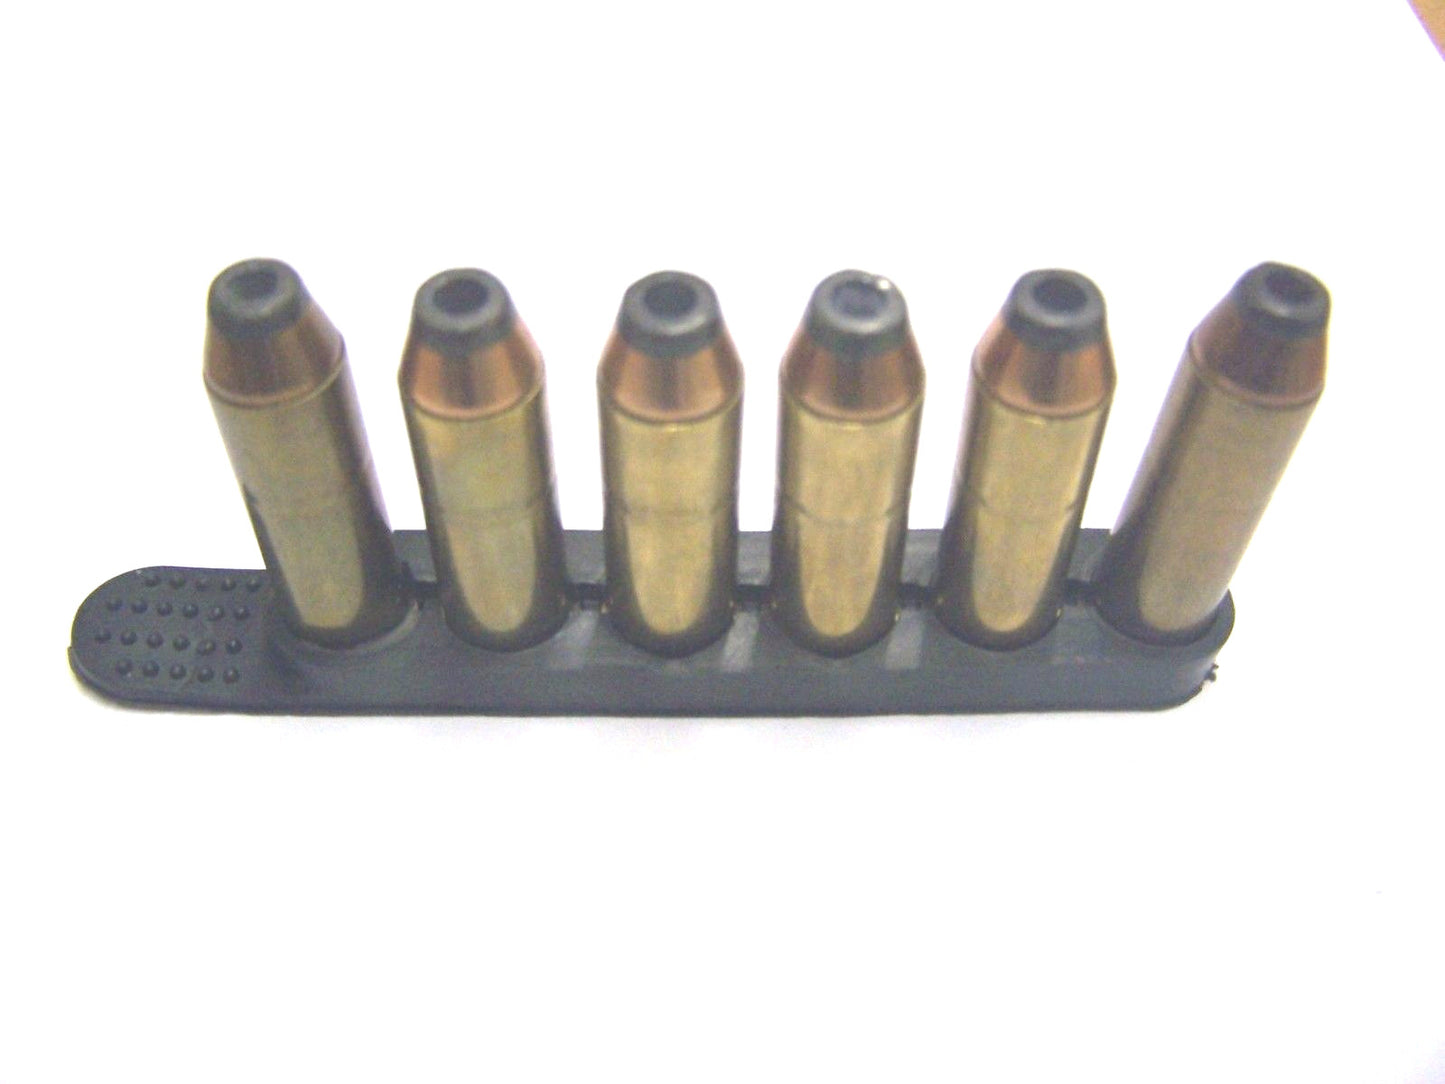 Bullet Strip .9mm Luger / .223 / .32 / .327 / Parabellum .380 Load Your 6 Rounds Quick With Speed